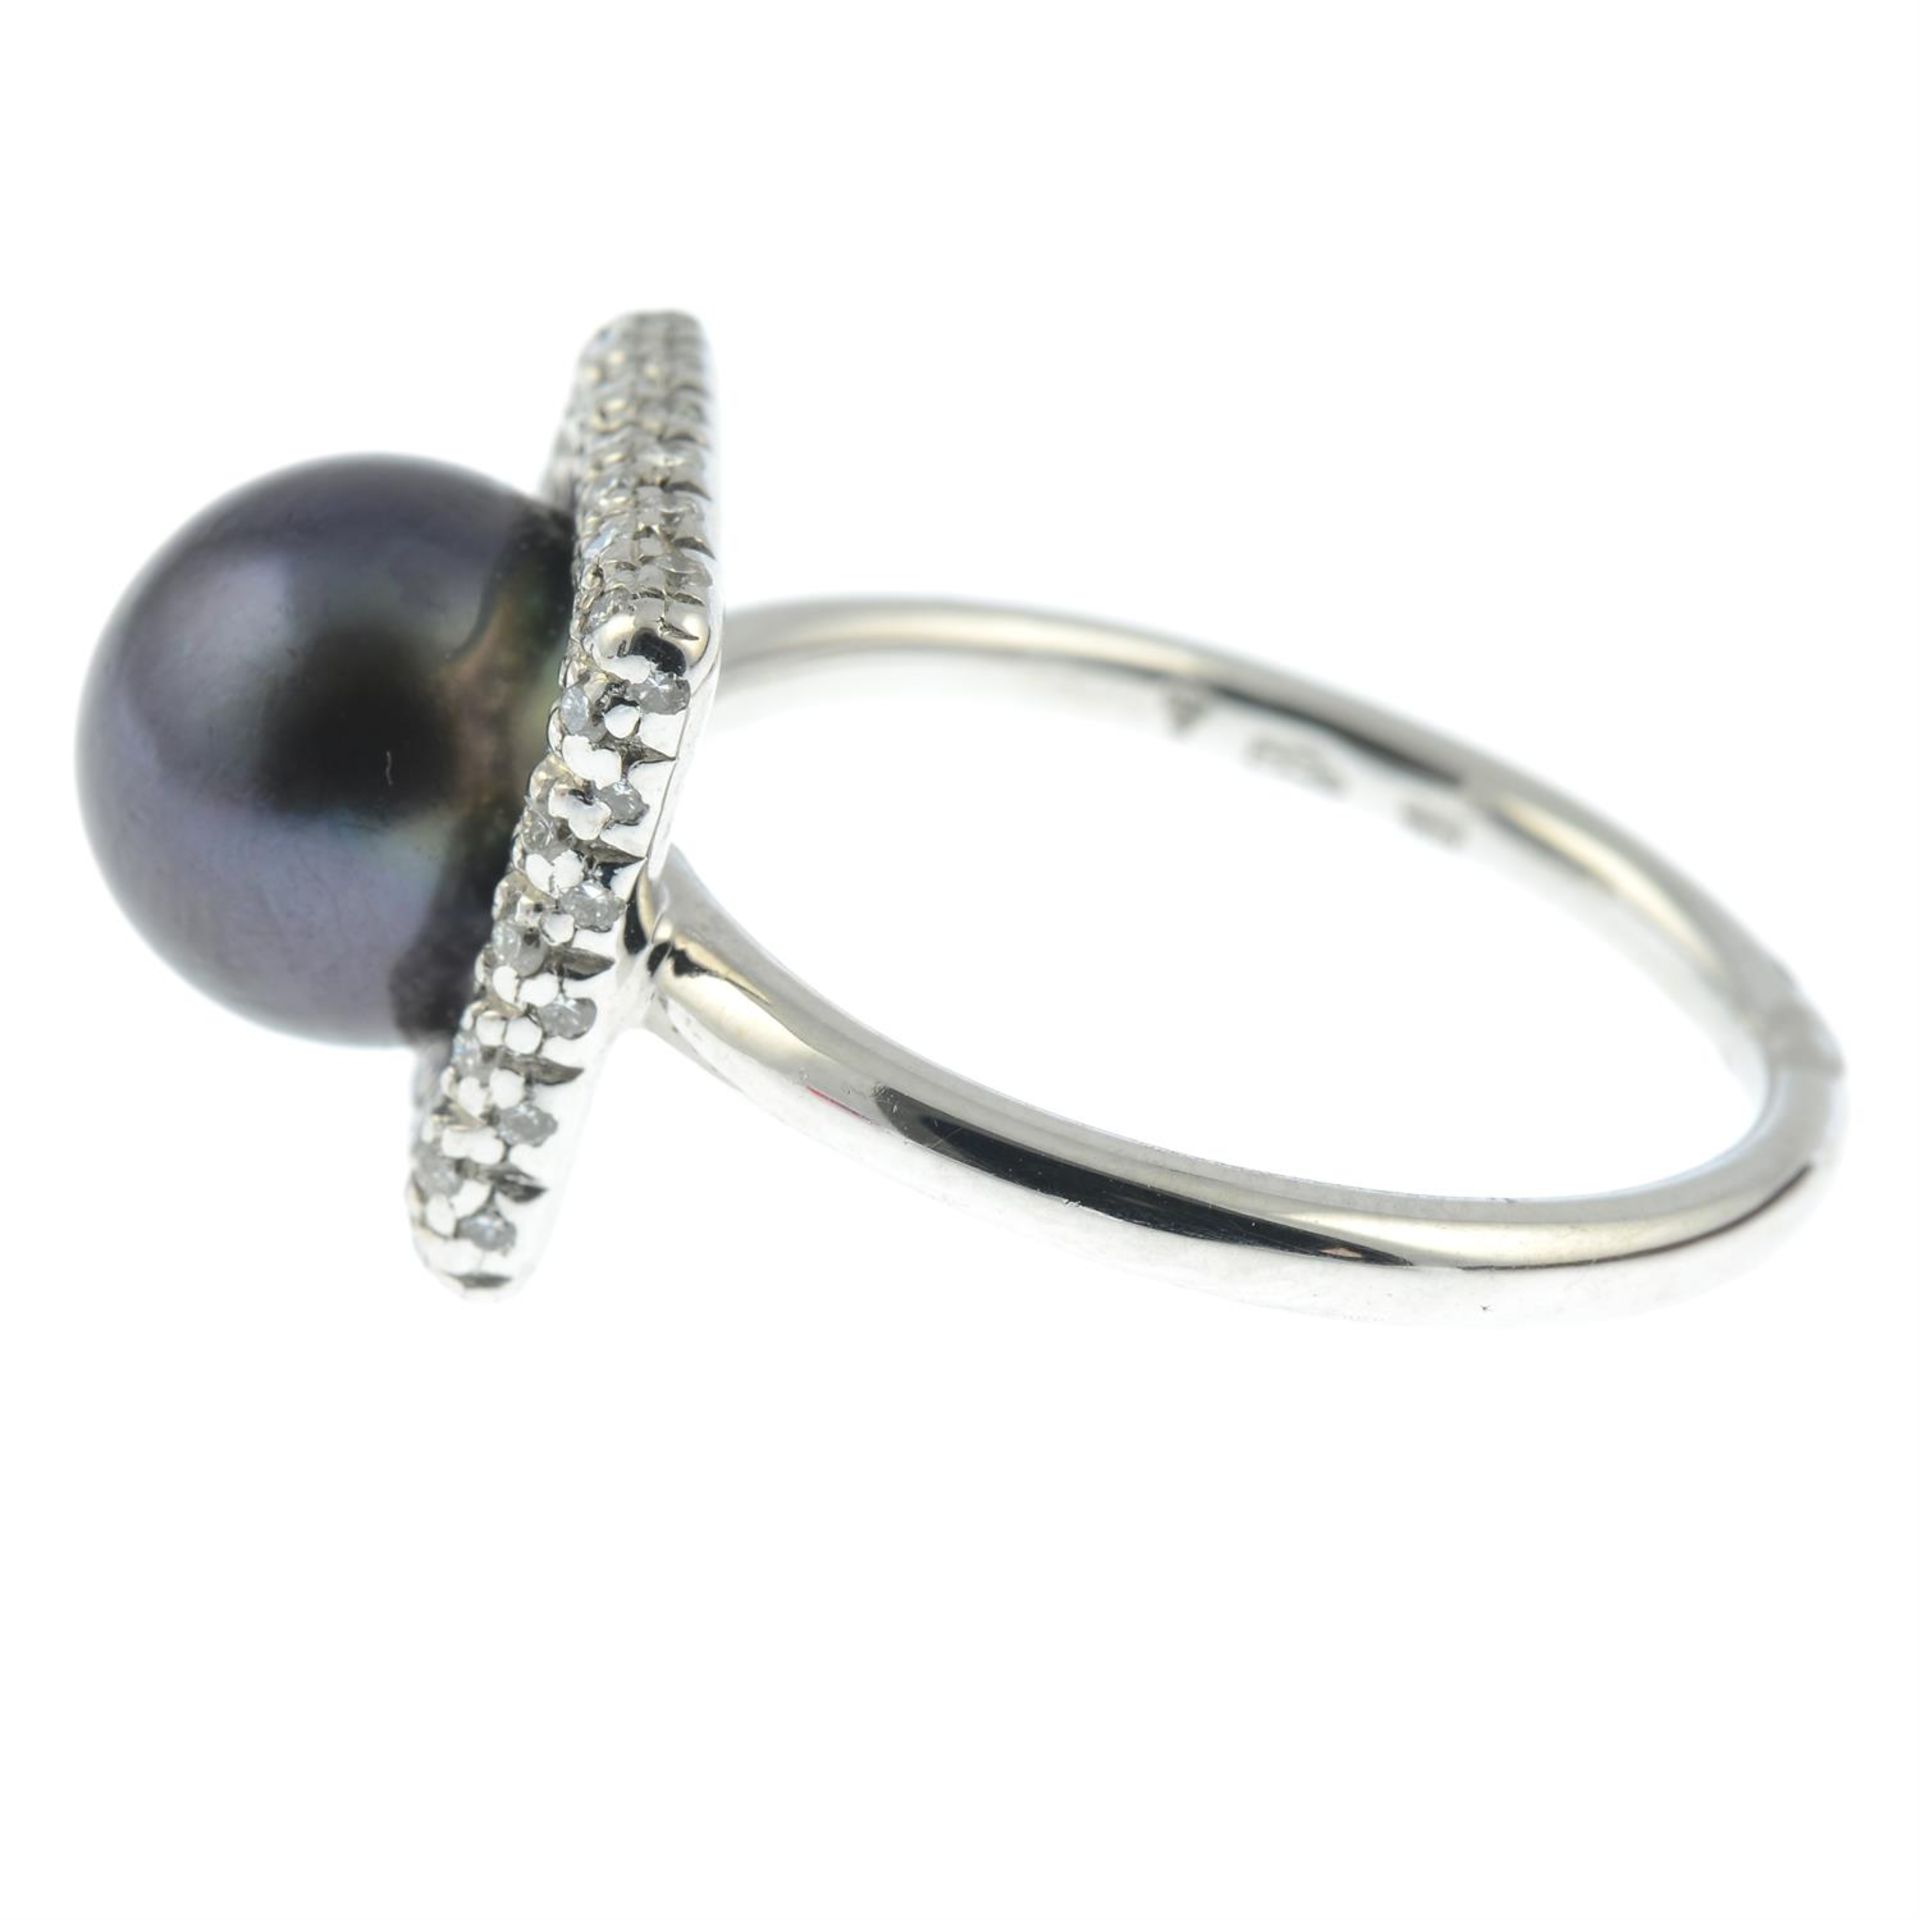 An 18ct gold 'Tahitian' cultured pearl and diamond ring, by Mikimoto. - Image 4 of 6